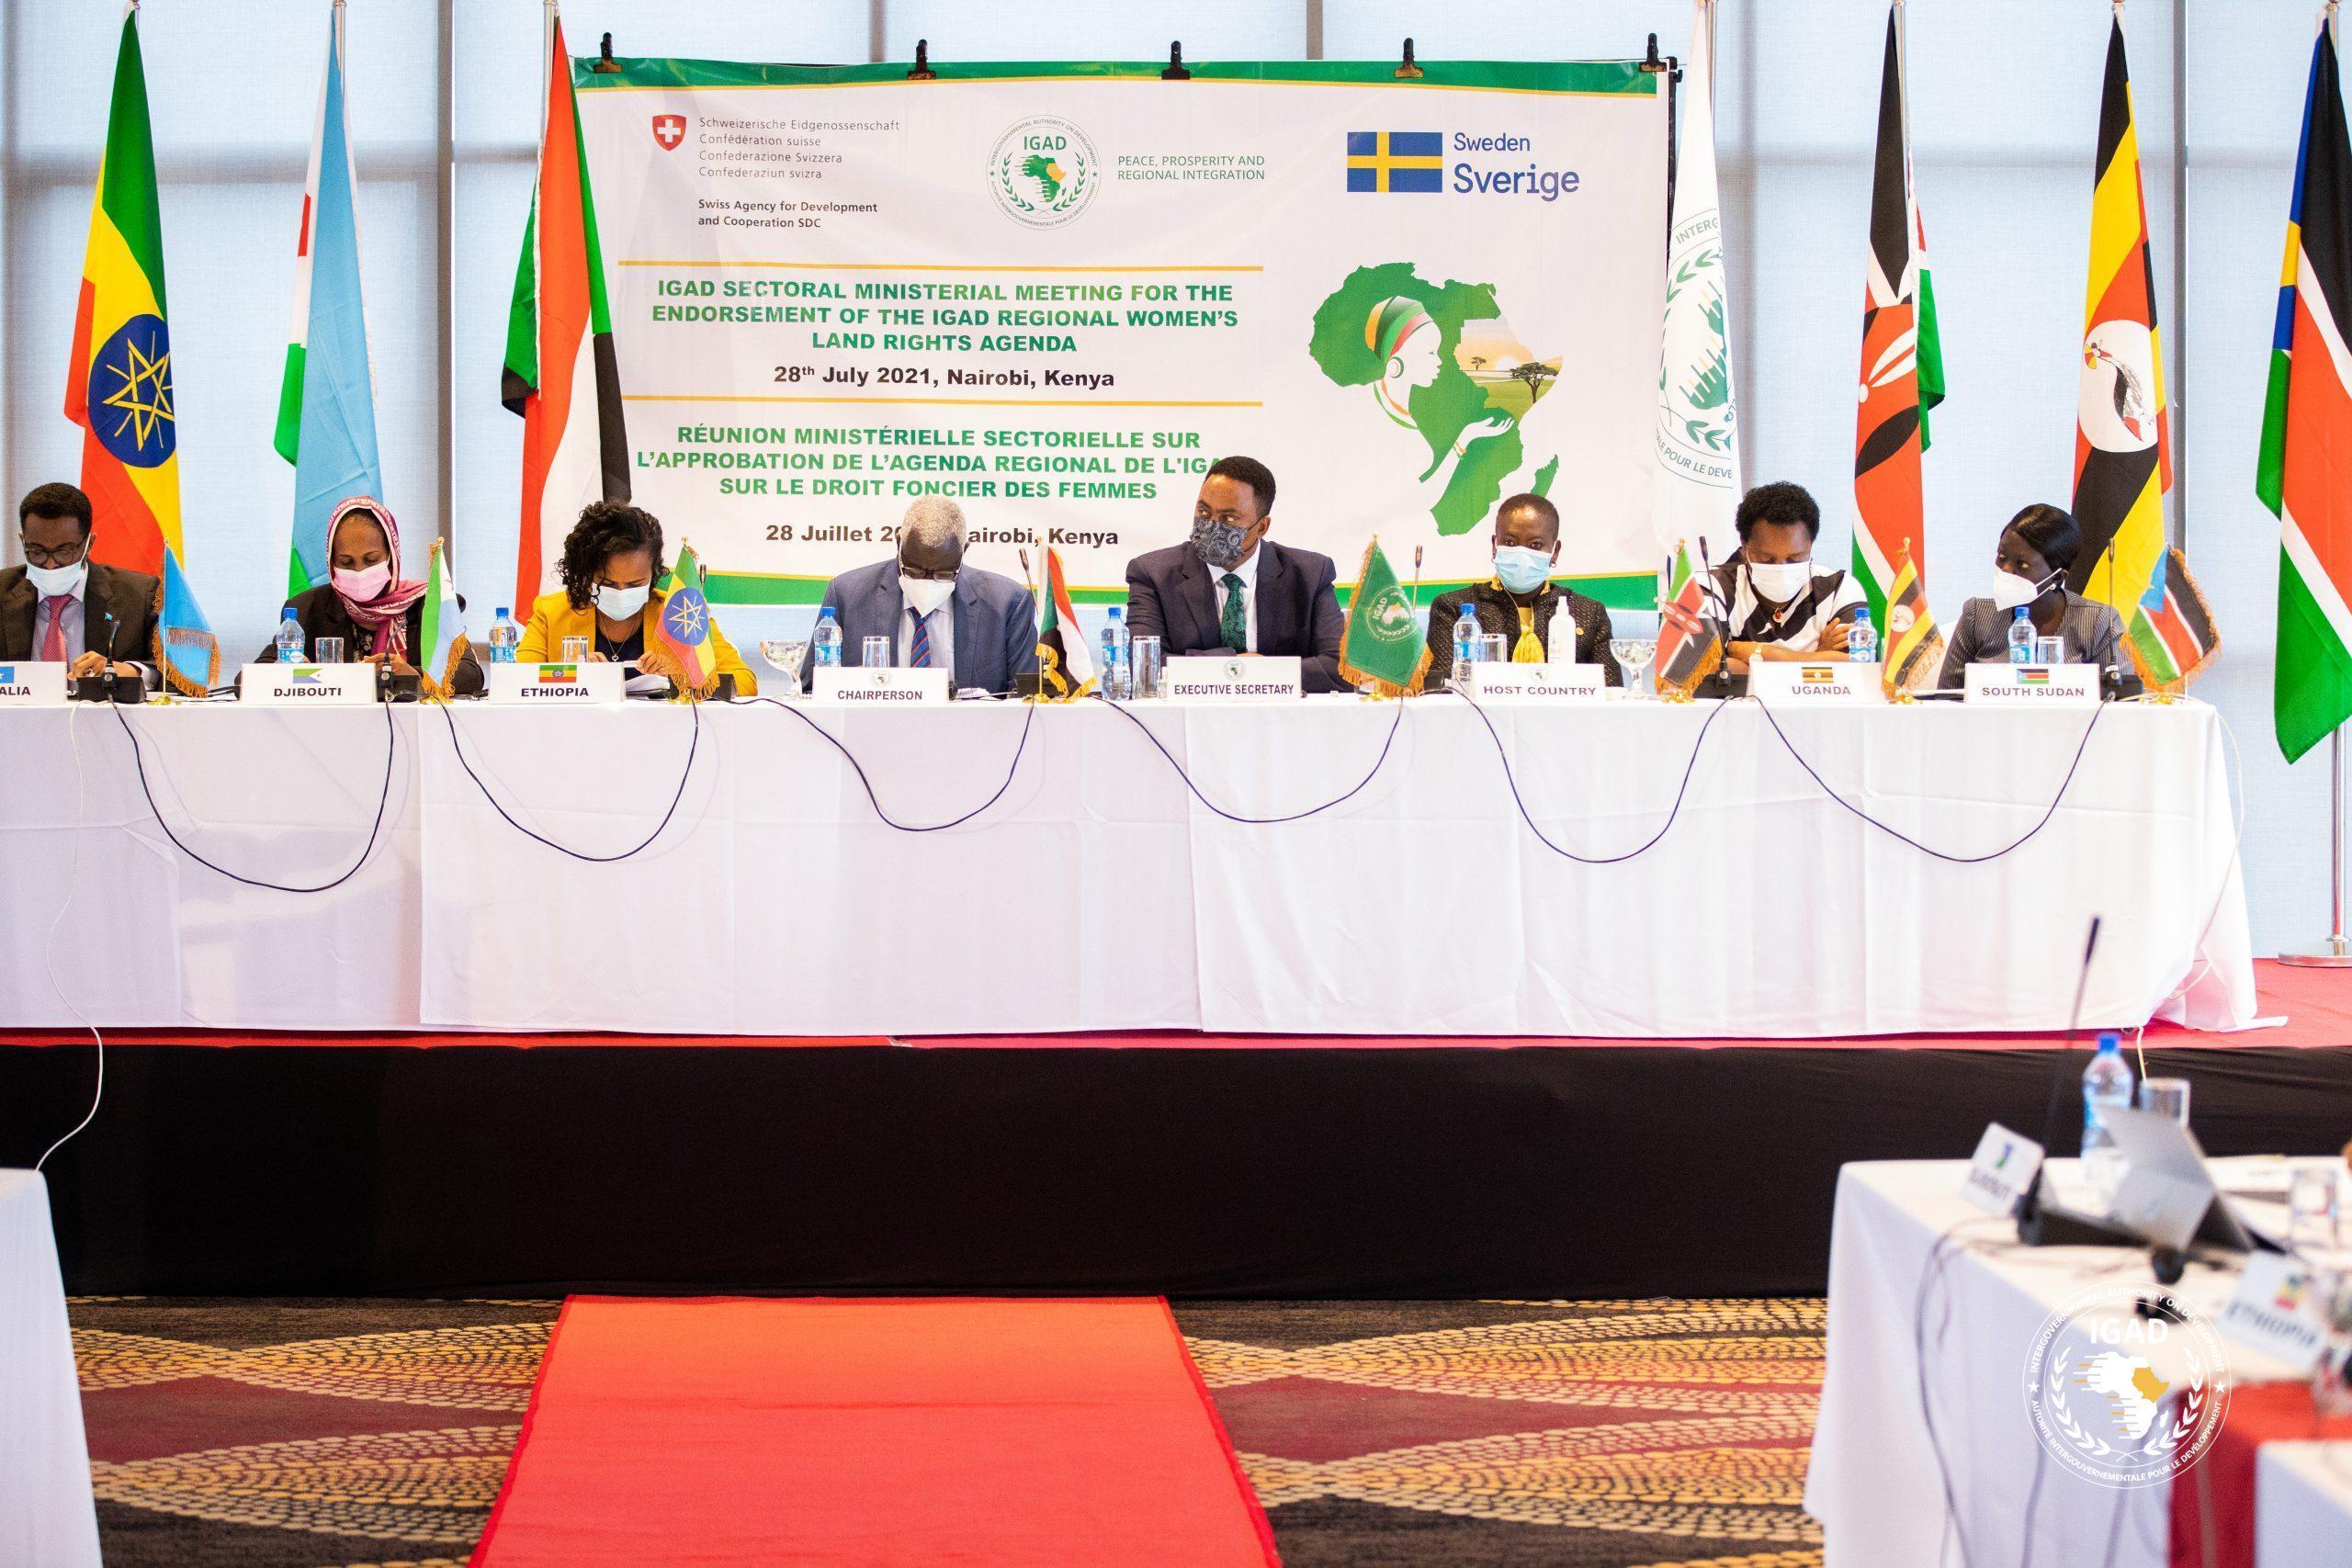 Opening Remarks by Dr. Workneh Gebeyehu, IGAD Executive Secretary at the Sectoral Ministers Meeting on Land Governance 29th July 2021, Nairobi, Kenya